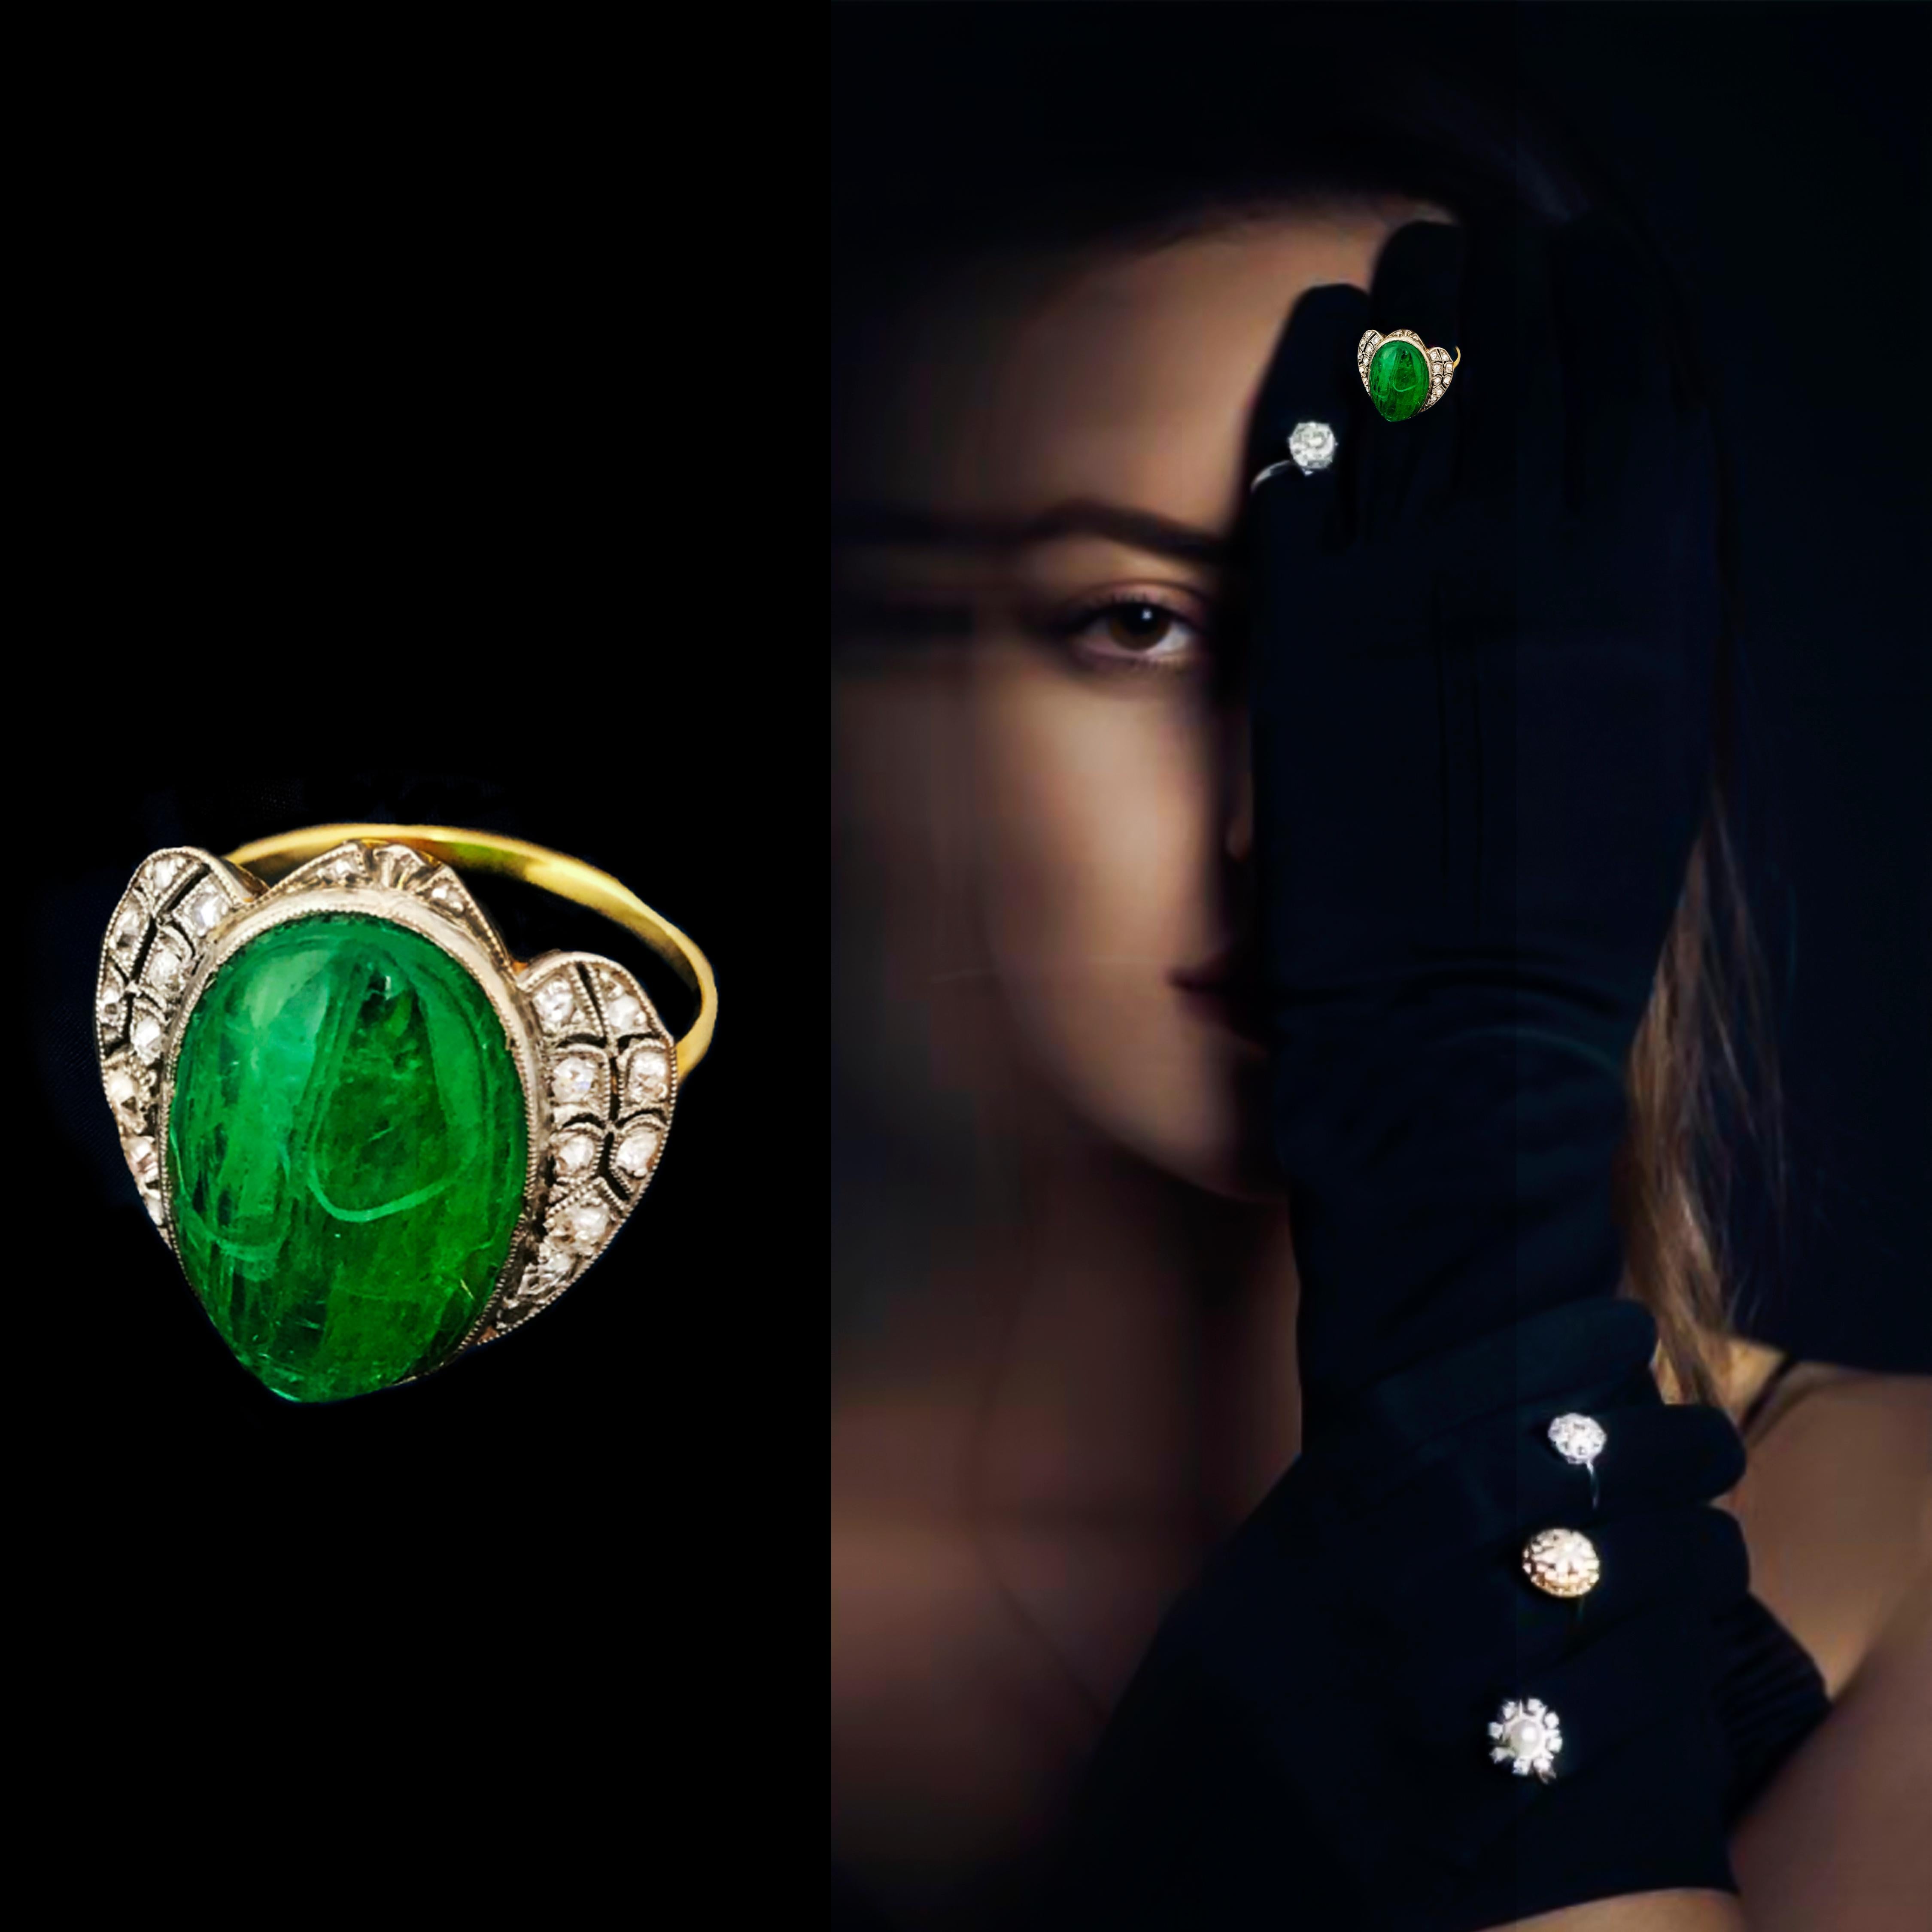 The present 18kt yellow and white gold ring is a very exquisite Art Deco Egyptian Revival 10 carat Hand Carved Emerald Scarab Cabochon ring accented by round cut diamonds and set into a delicately made open milegrain setting. The ring is attributed